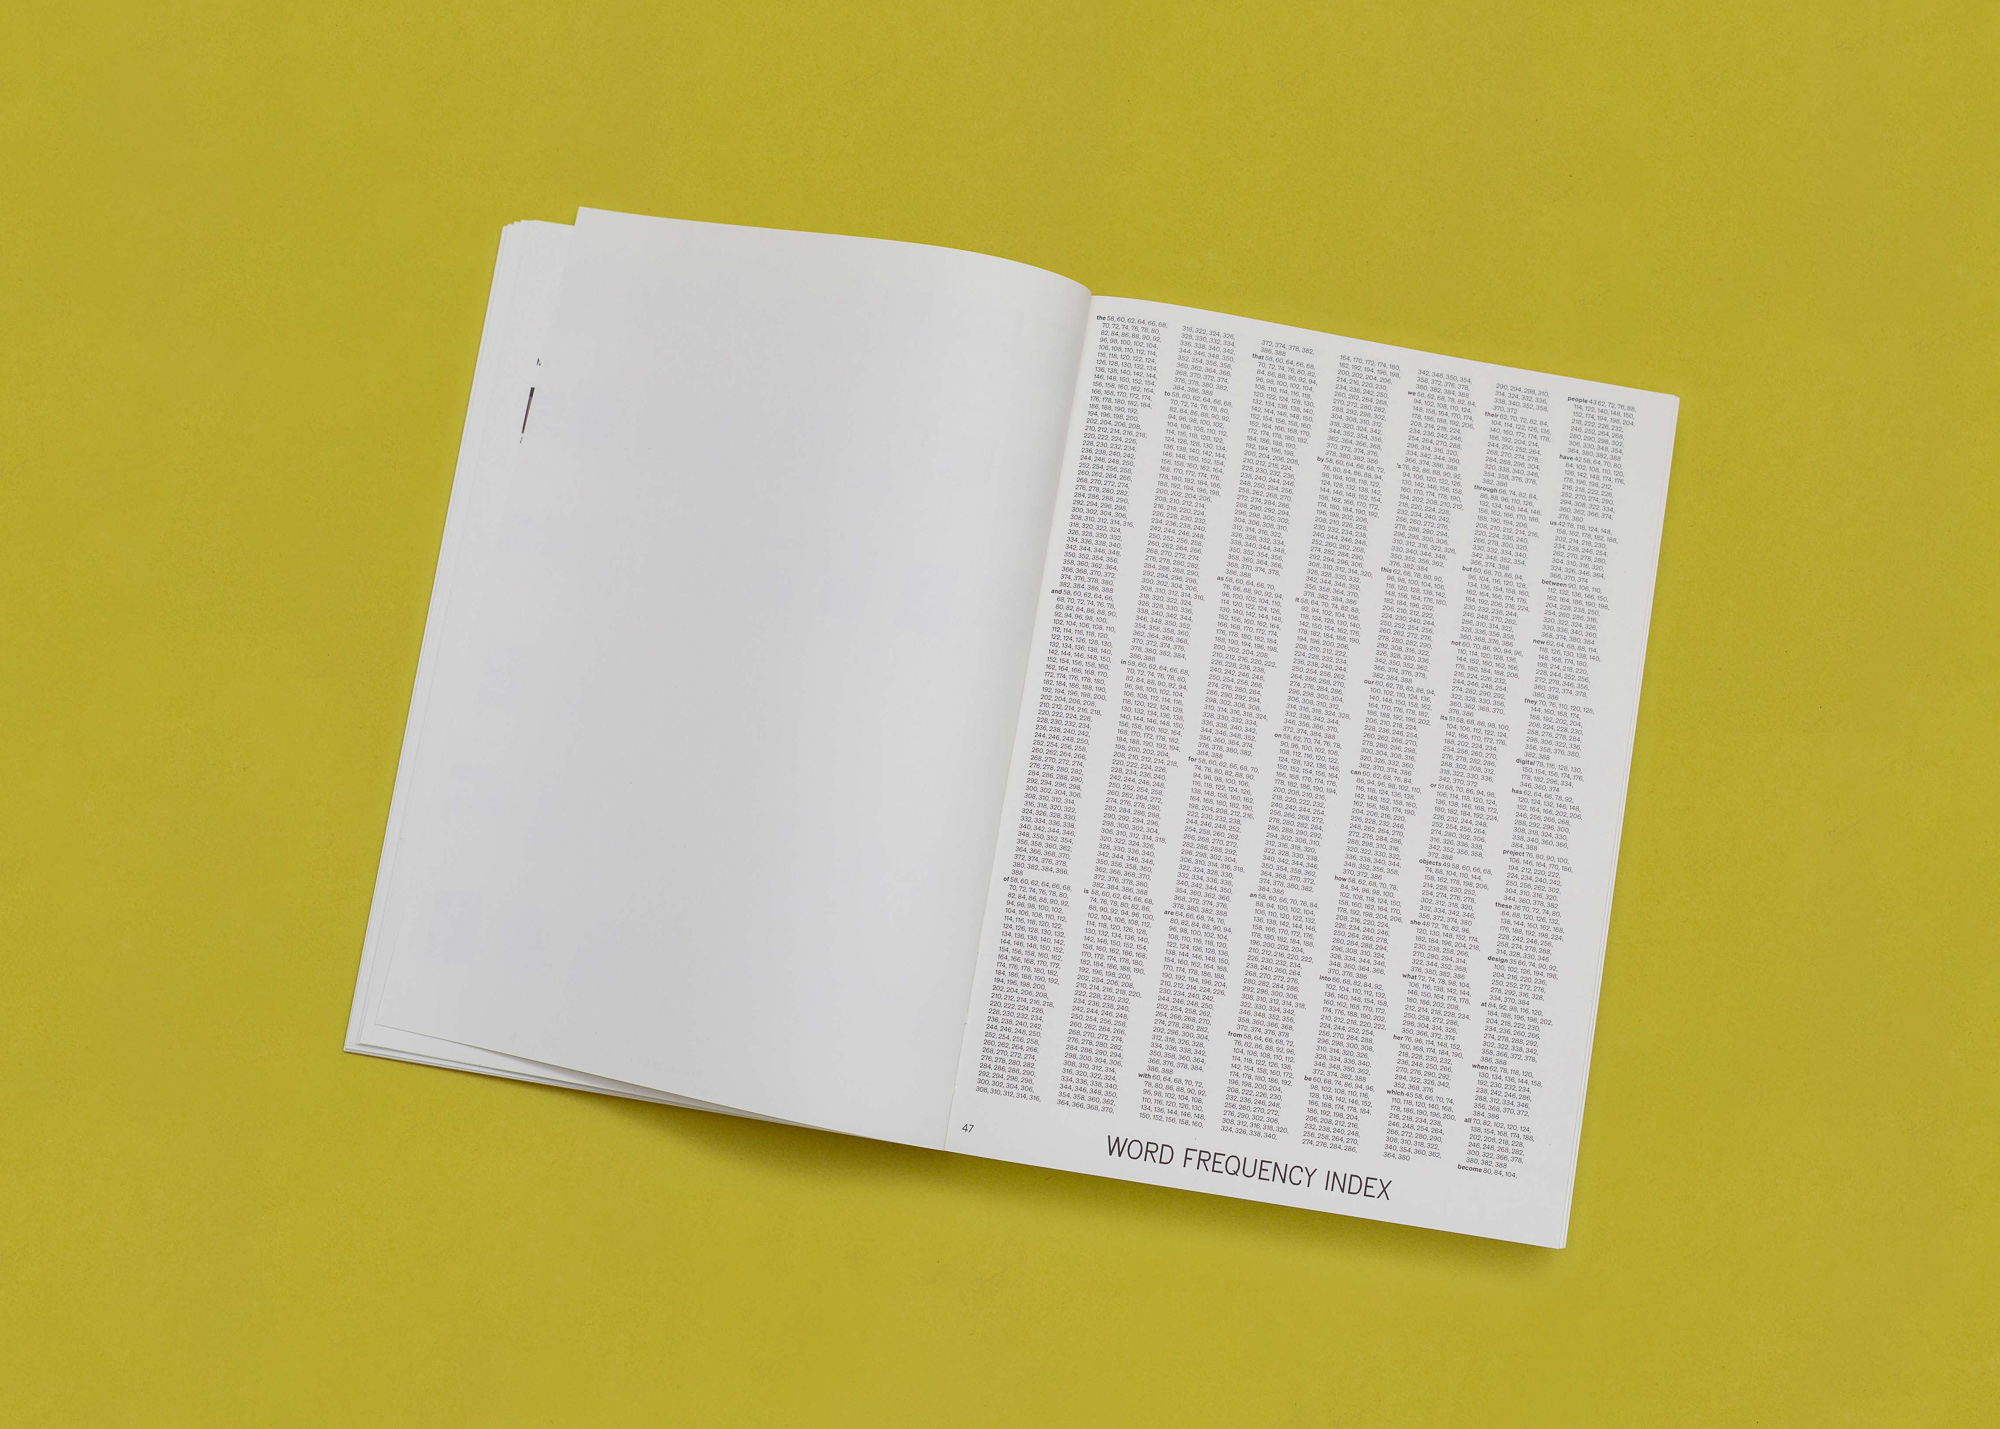 Word Frequency Index of the Design Academy Graduation Catalogue 2021